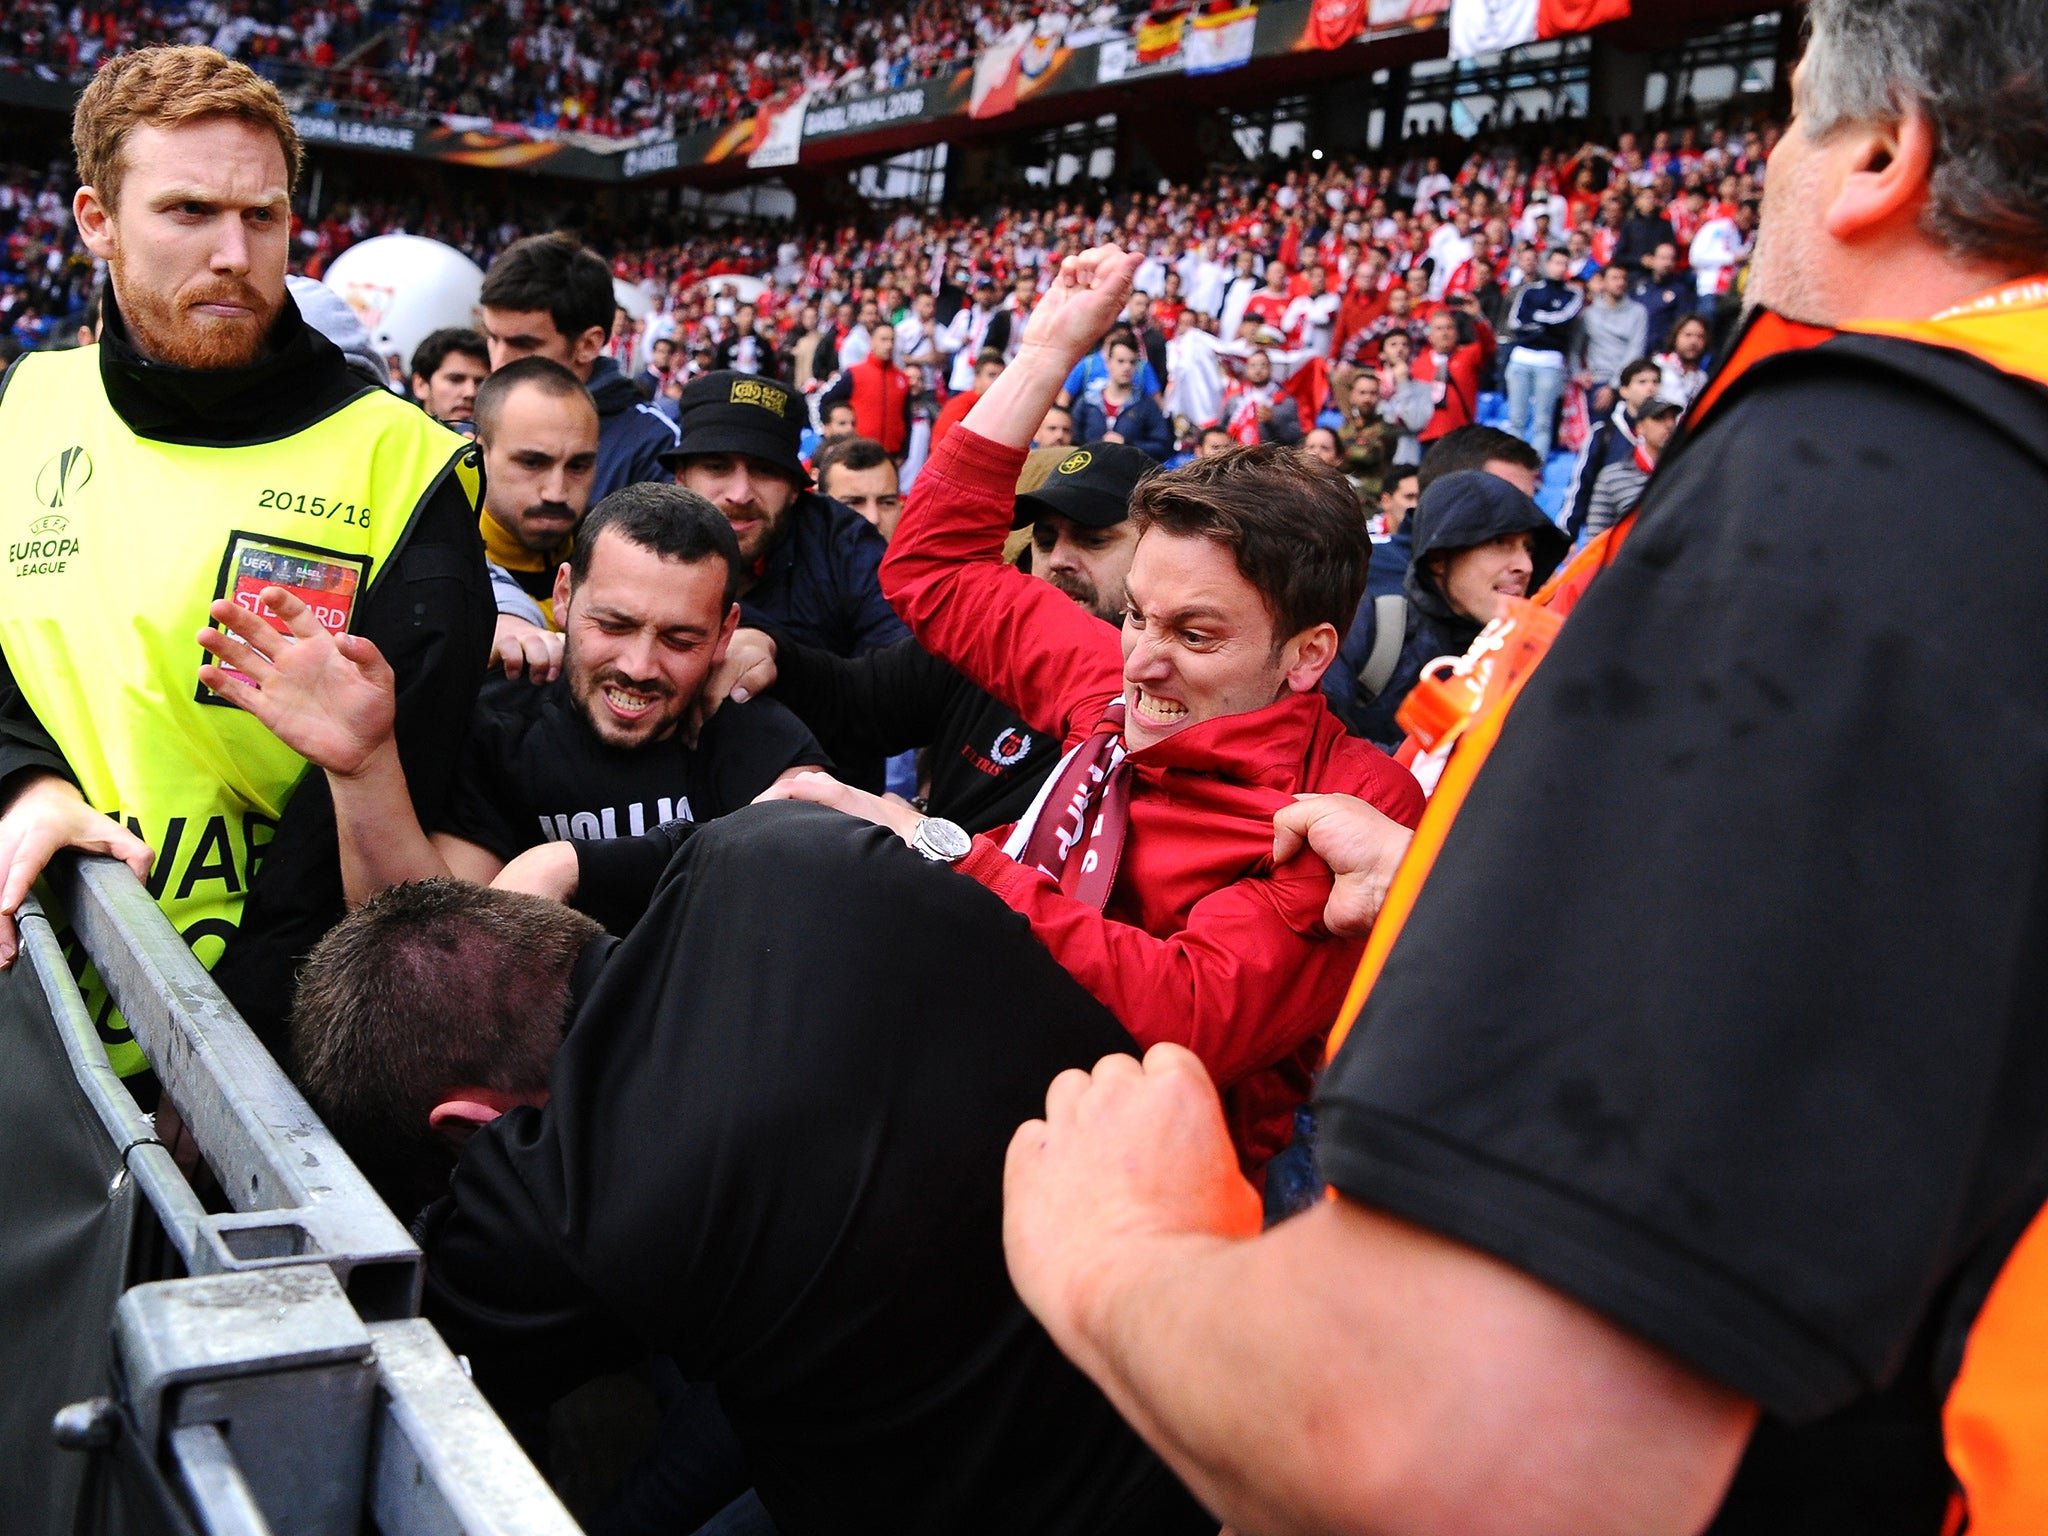 Fans scuffle prior to the UEFA Europa League Final match between Liverpool and Sevilla at St. Jakob-Park